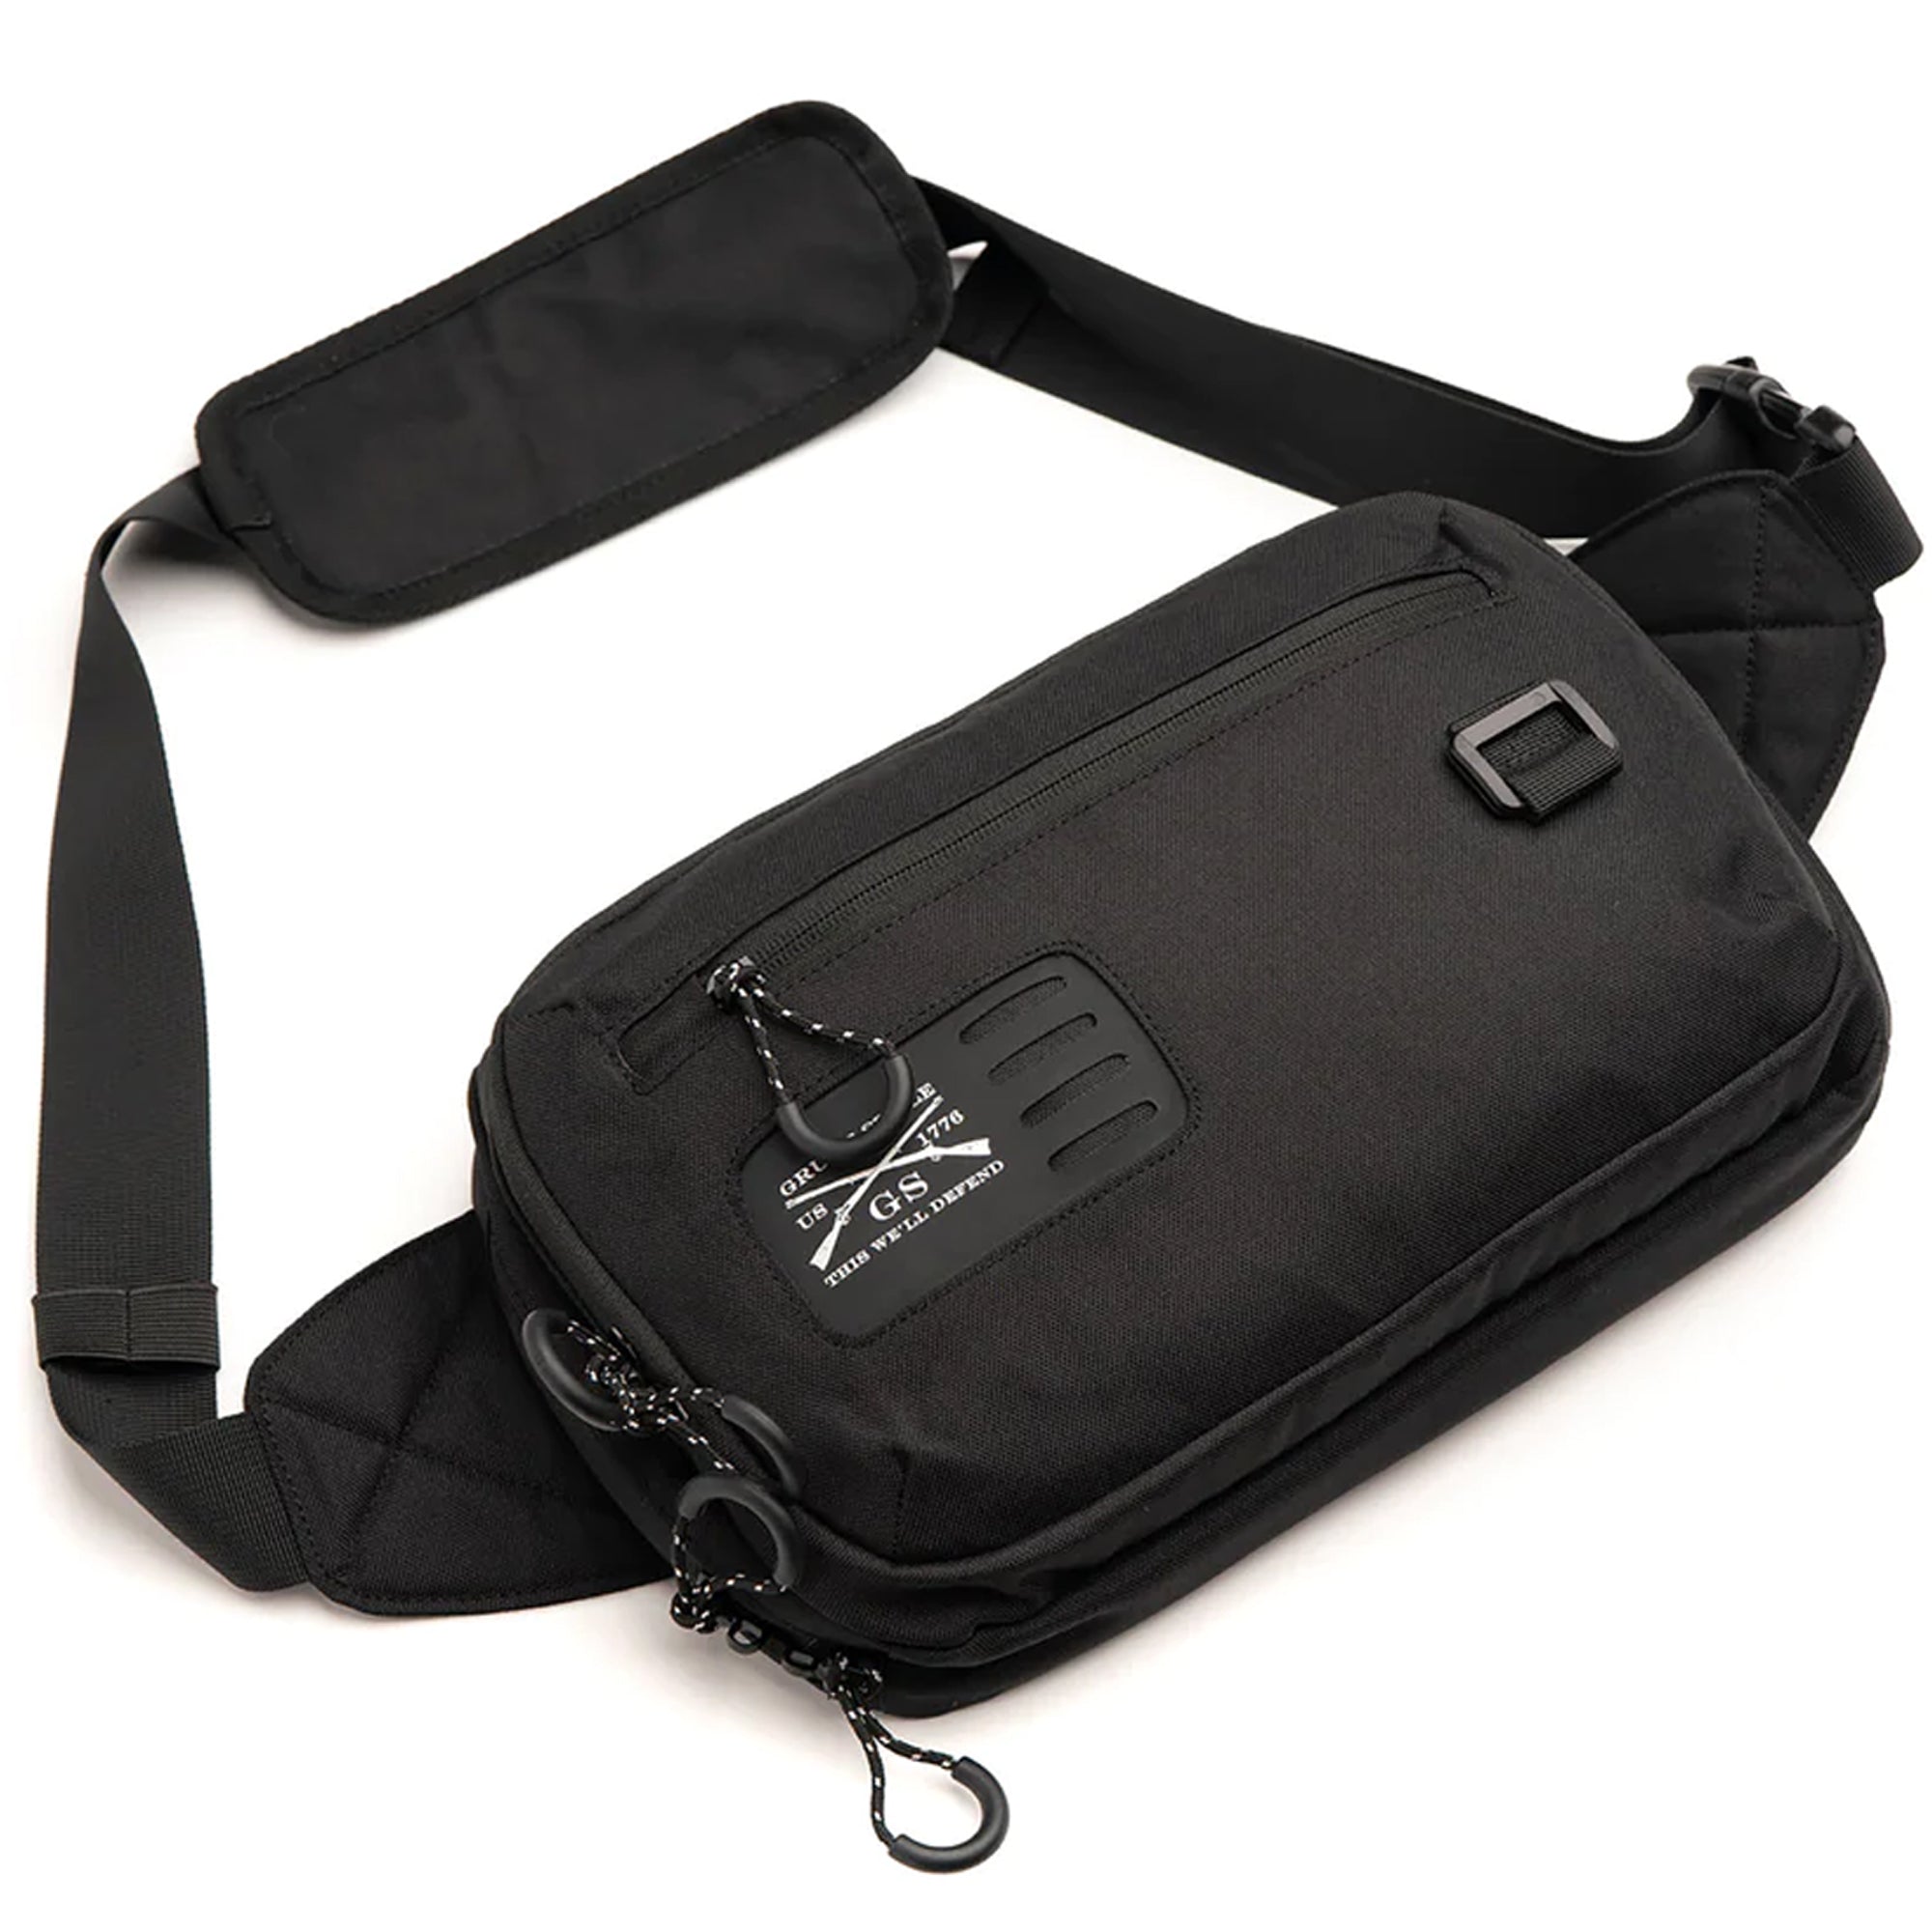 Grunt Style Everyday Carry Fanny Pack - Black Grunt Style